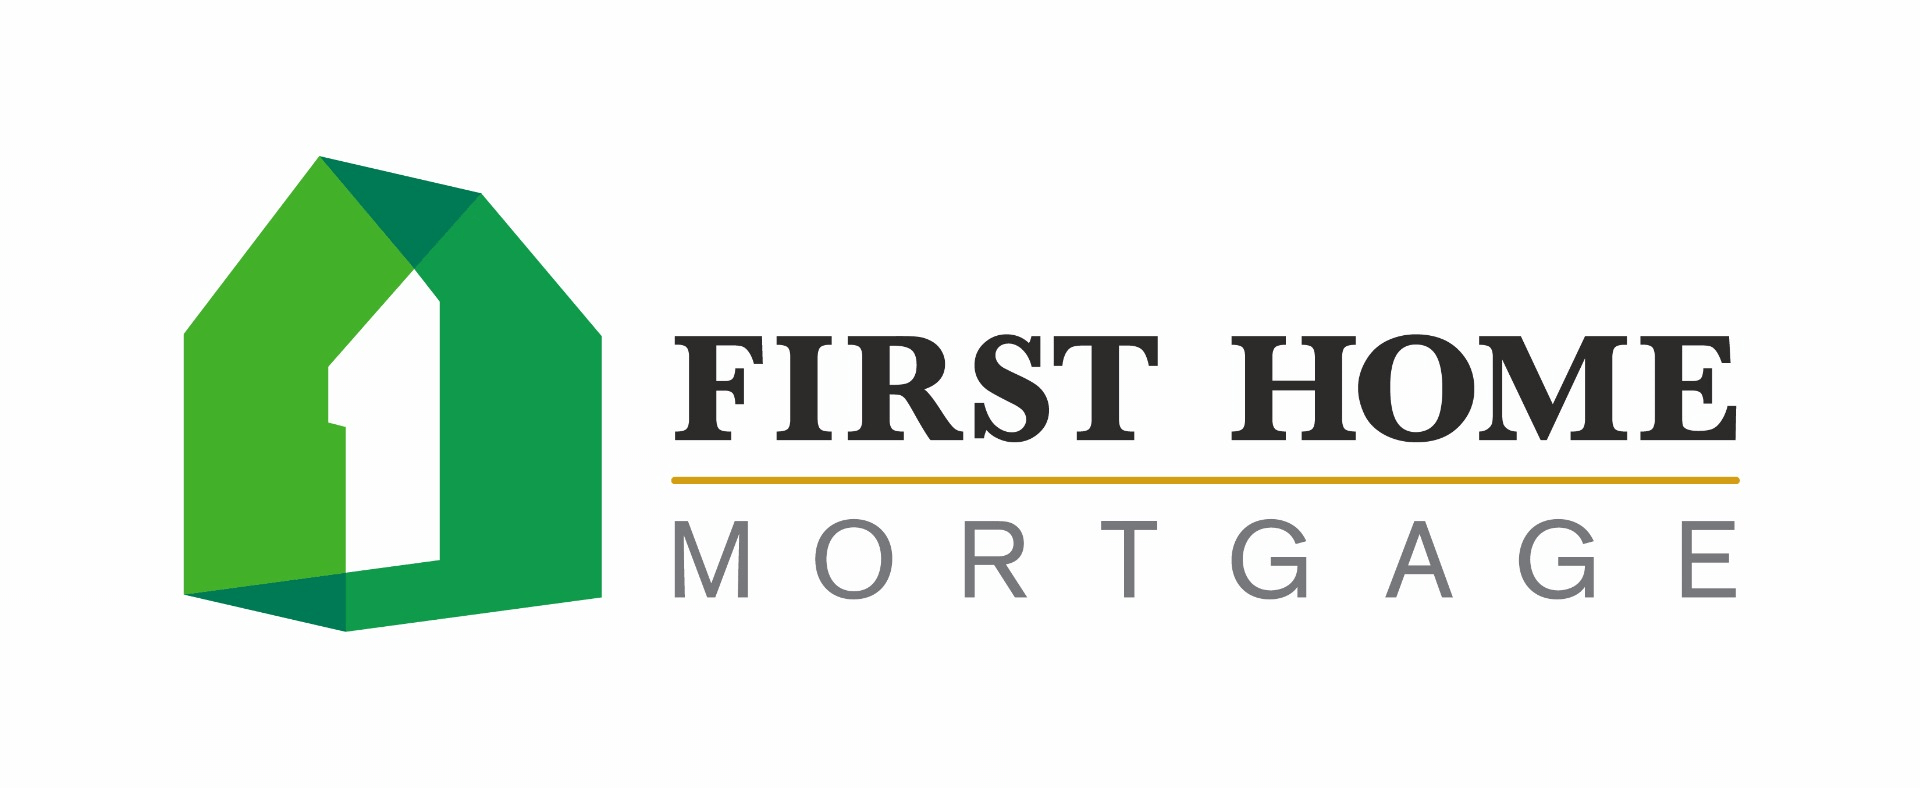 Tom Draper - First Home Mortgage